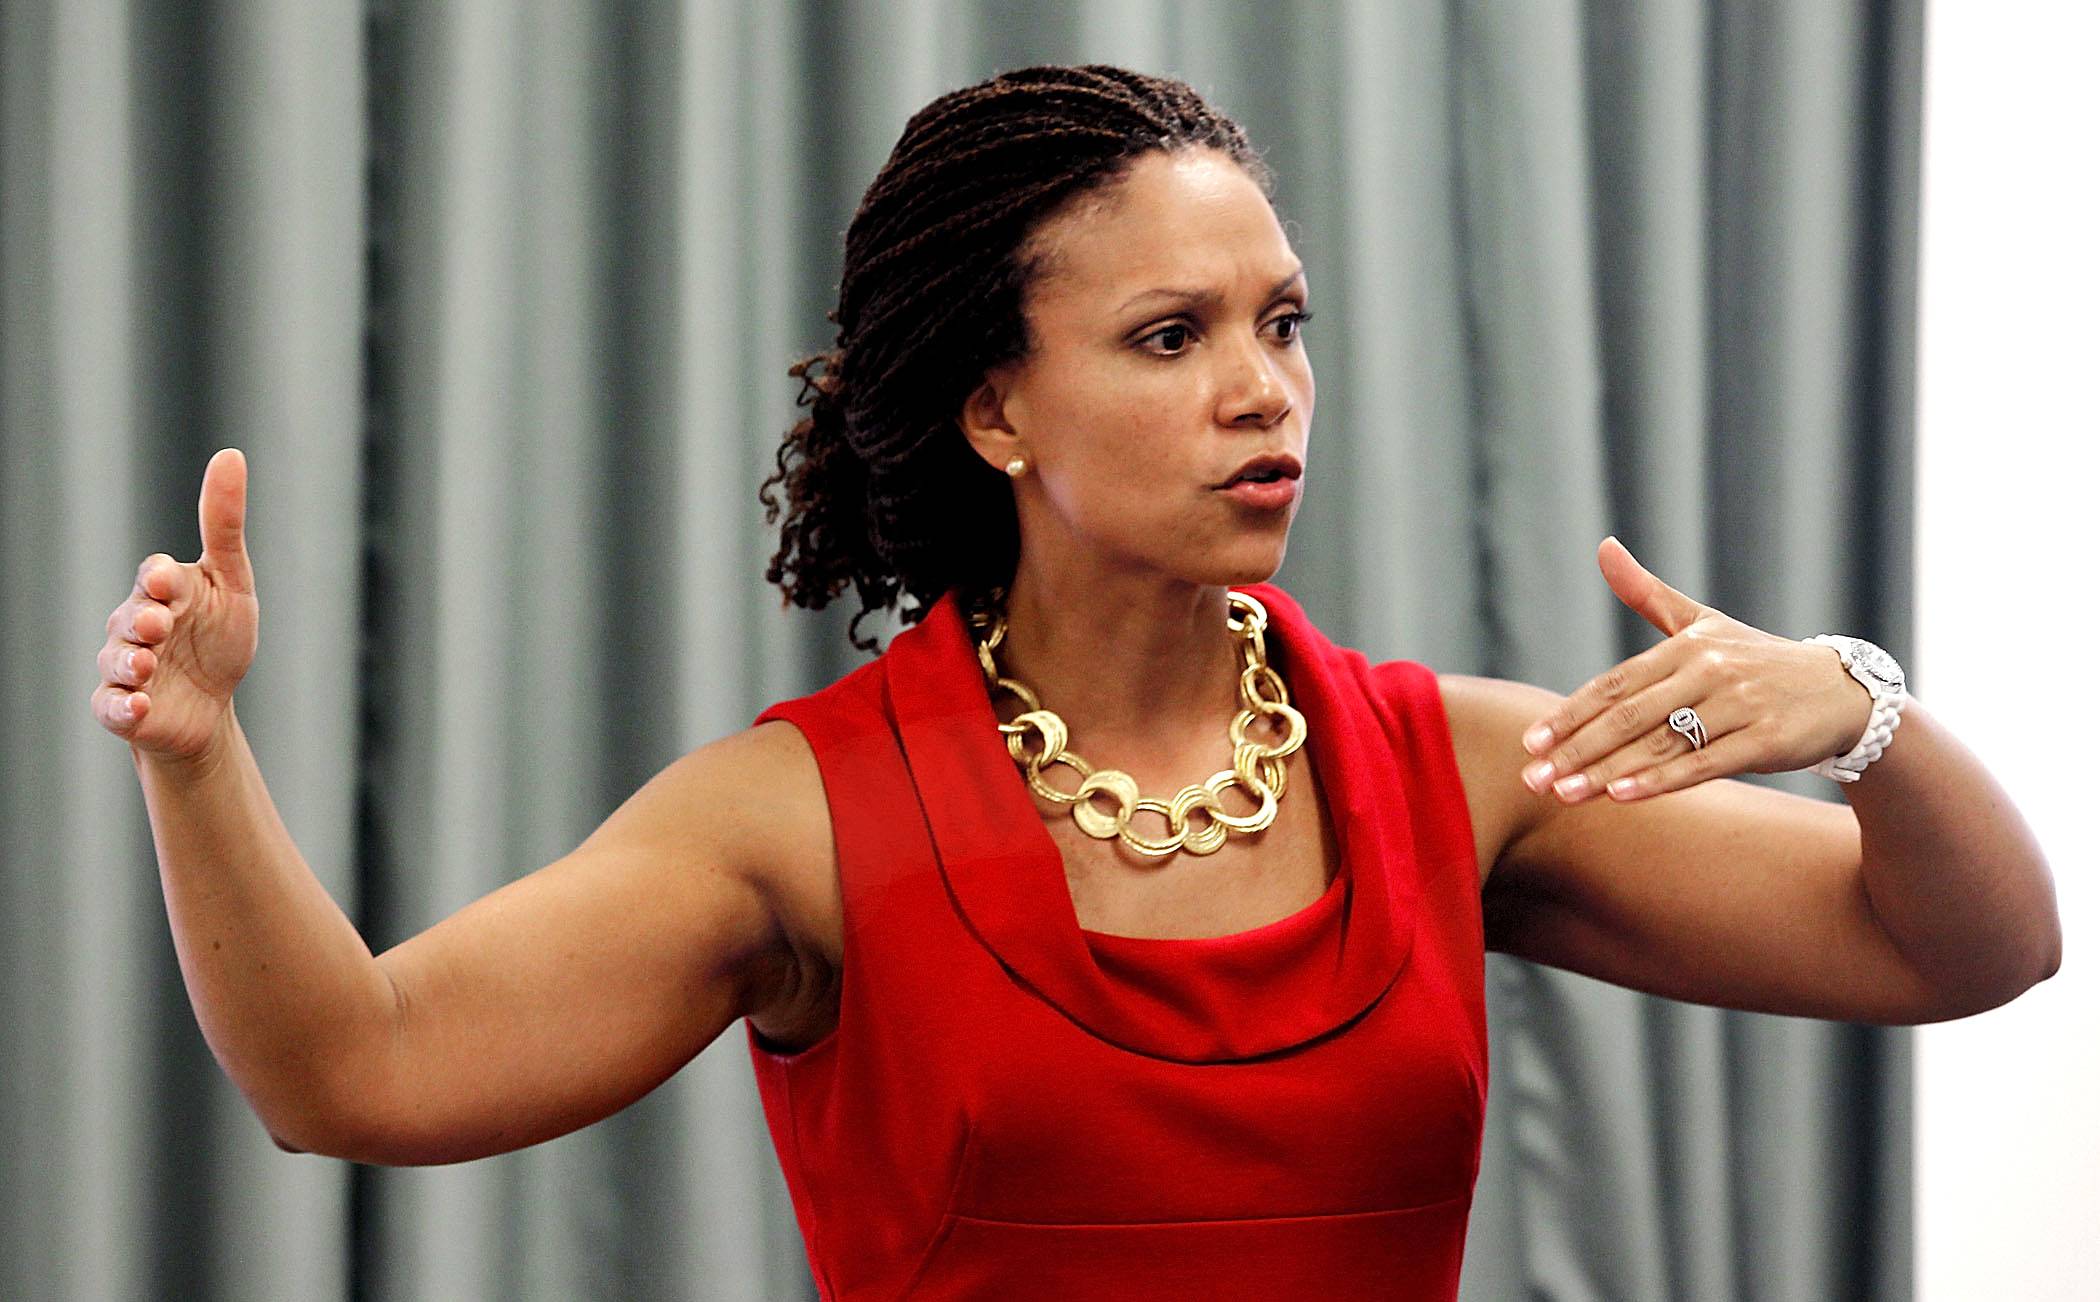 Prof. Melissa Harris-Perry  - “The loss of Prof Derrick Bell is painful. His book &quot;Ethical Ambition&quot; lives on my bedside table. He taught all of us so much,” Harris-Perry tweeted about law professor Derrick Bell, who died Wednesday from carcinoid cancer.(Photo: Times-Picayune/Landov)